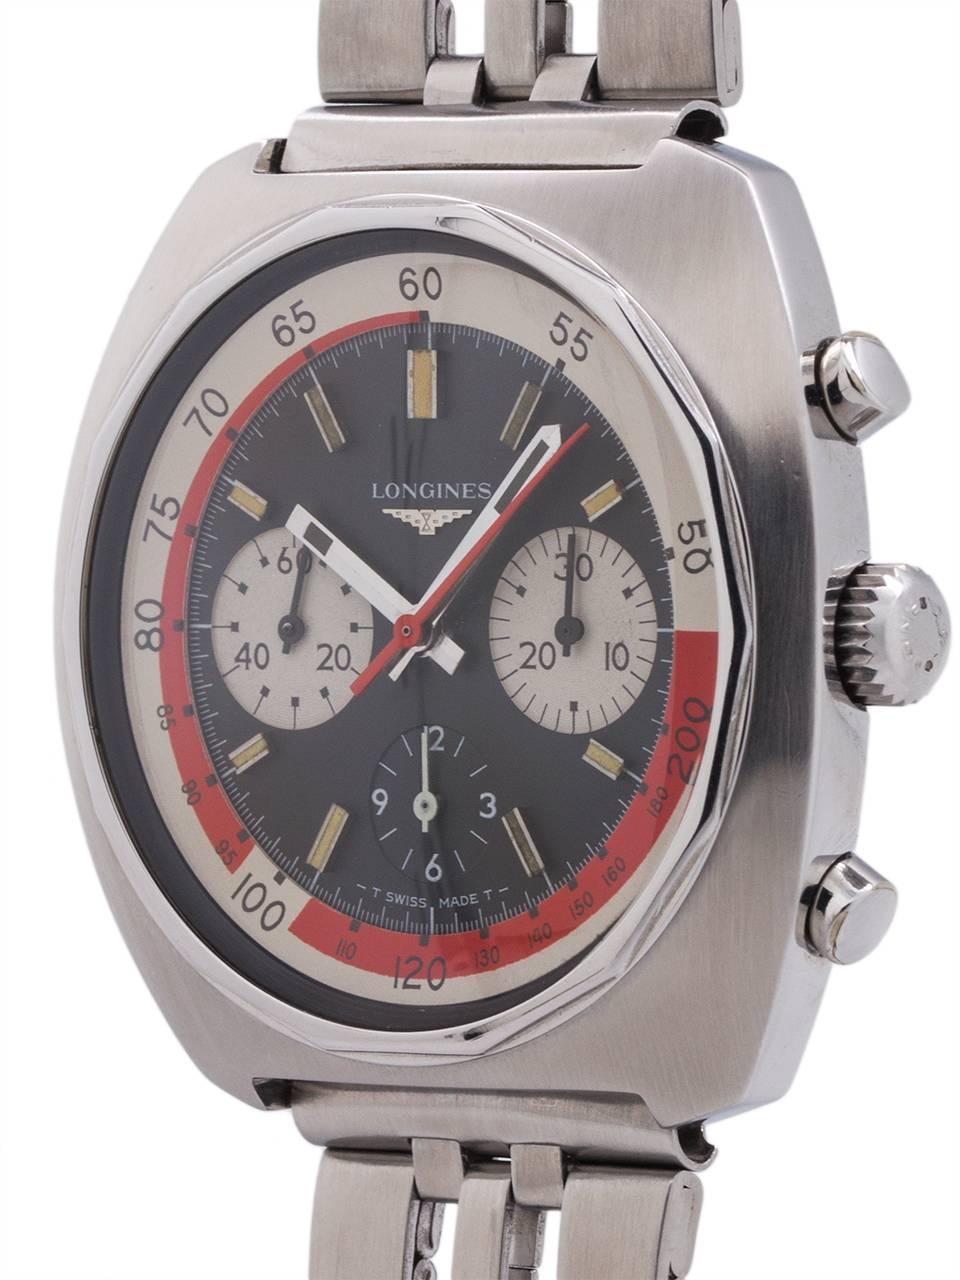 
Longines Conquest massive cushion case chronograph circa 1970’s. 43 X 44mm cut corner cushion shaped stainless steel case with screw down back, round pushers and sapphire crystal. Great looking original black, red, and white dial with stylized